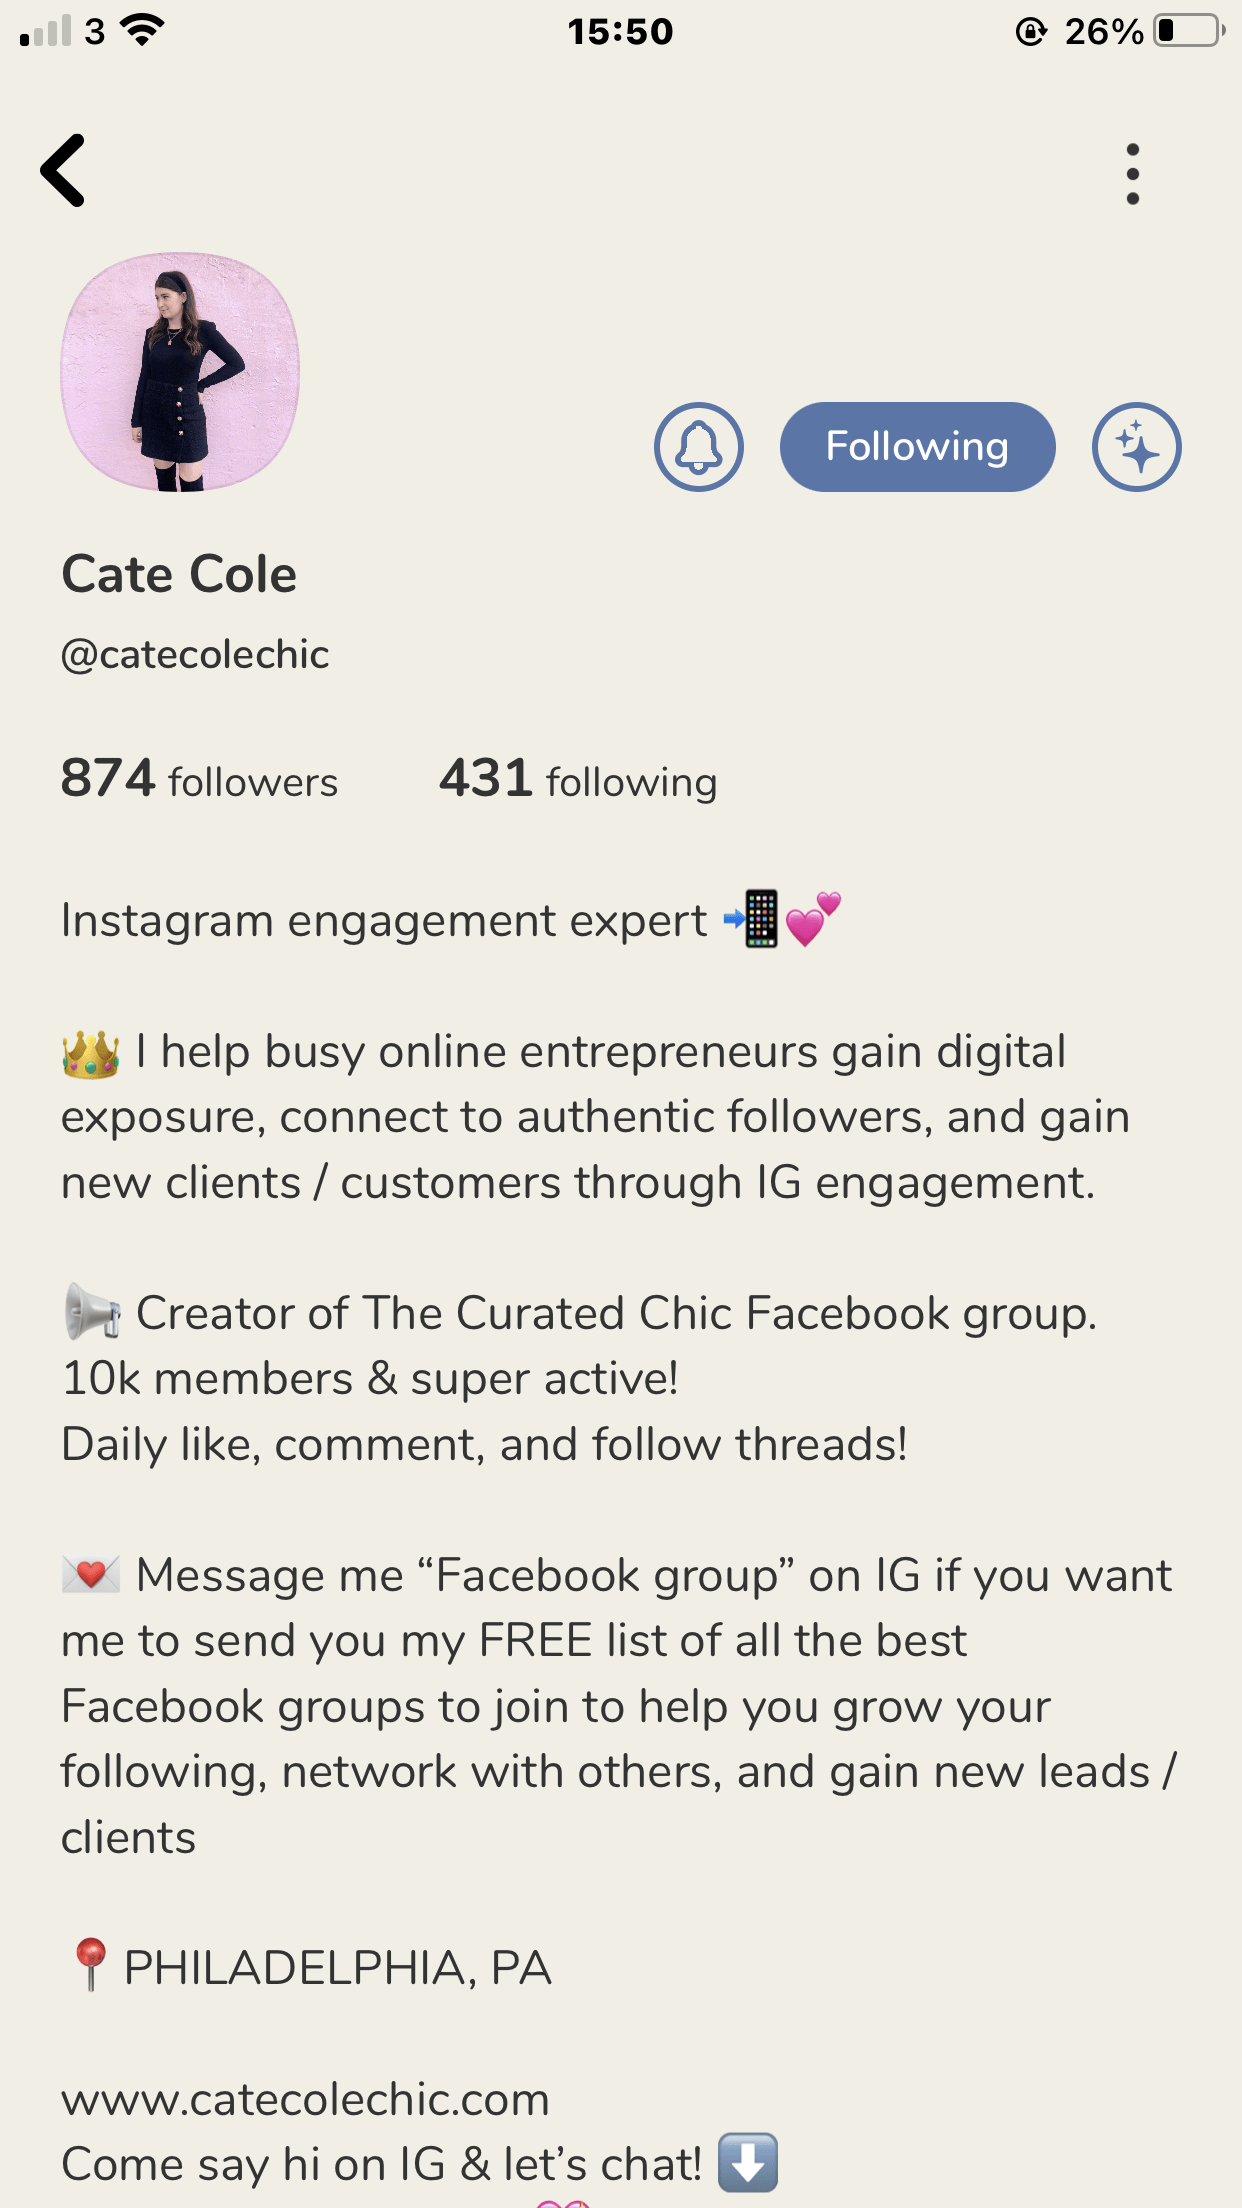 Cate Cole's clubhouse profile